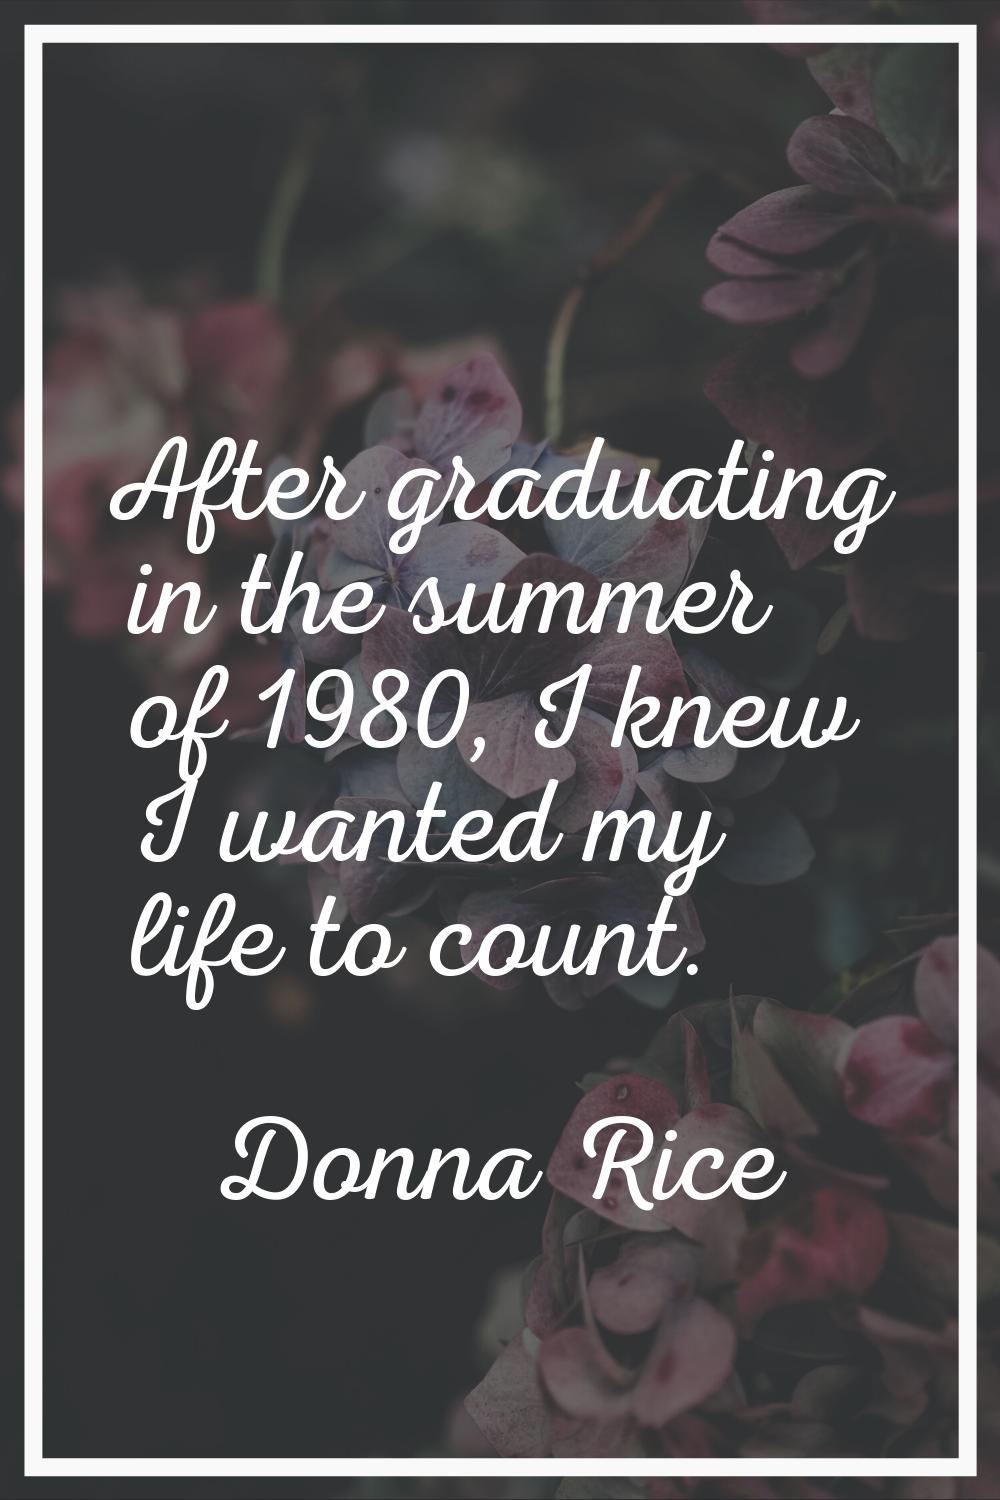 After graduating in the summer of 1980, I knew I wanted my life to count.